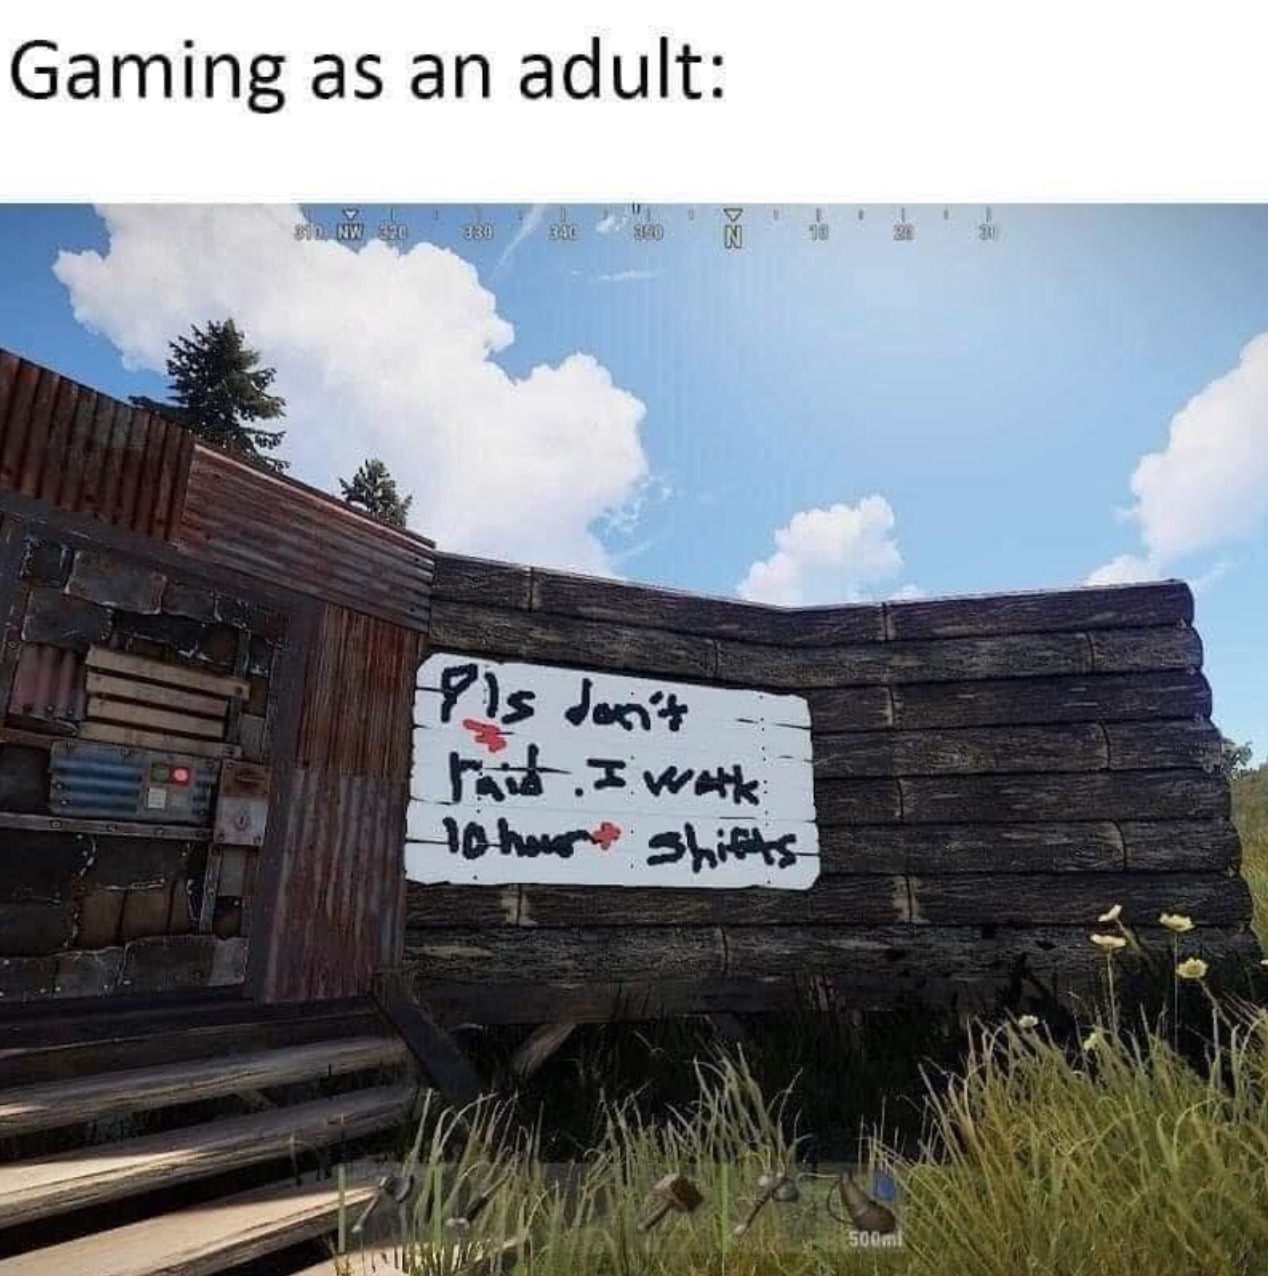 gaming memes - sky - Gaming as an adult Pls don't Tit. I with 10 hour shifts 500ml